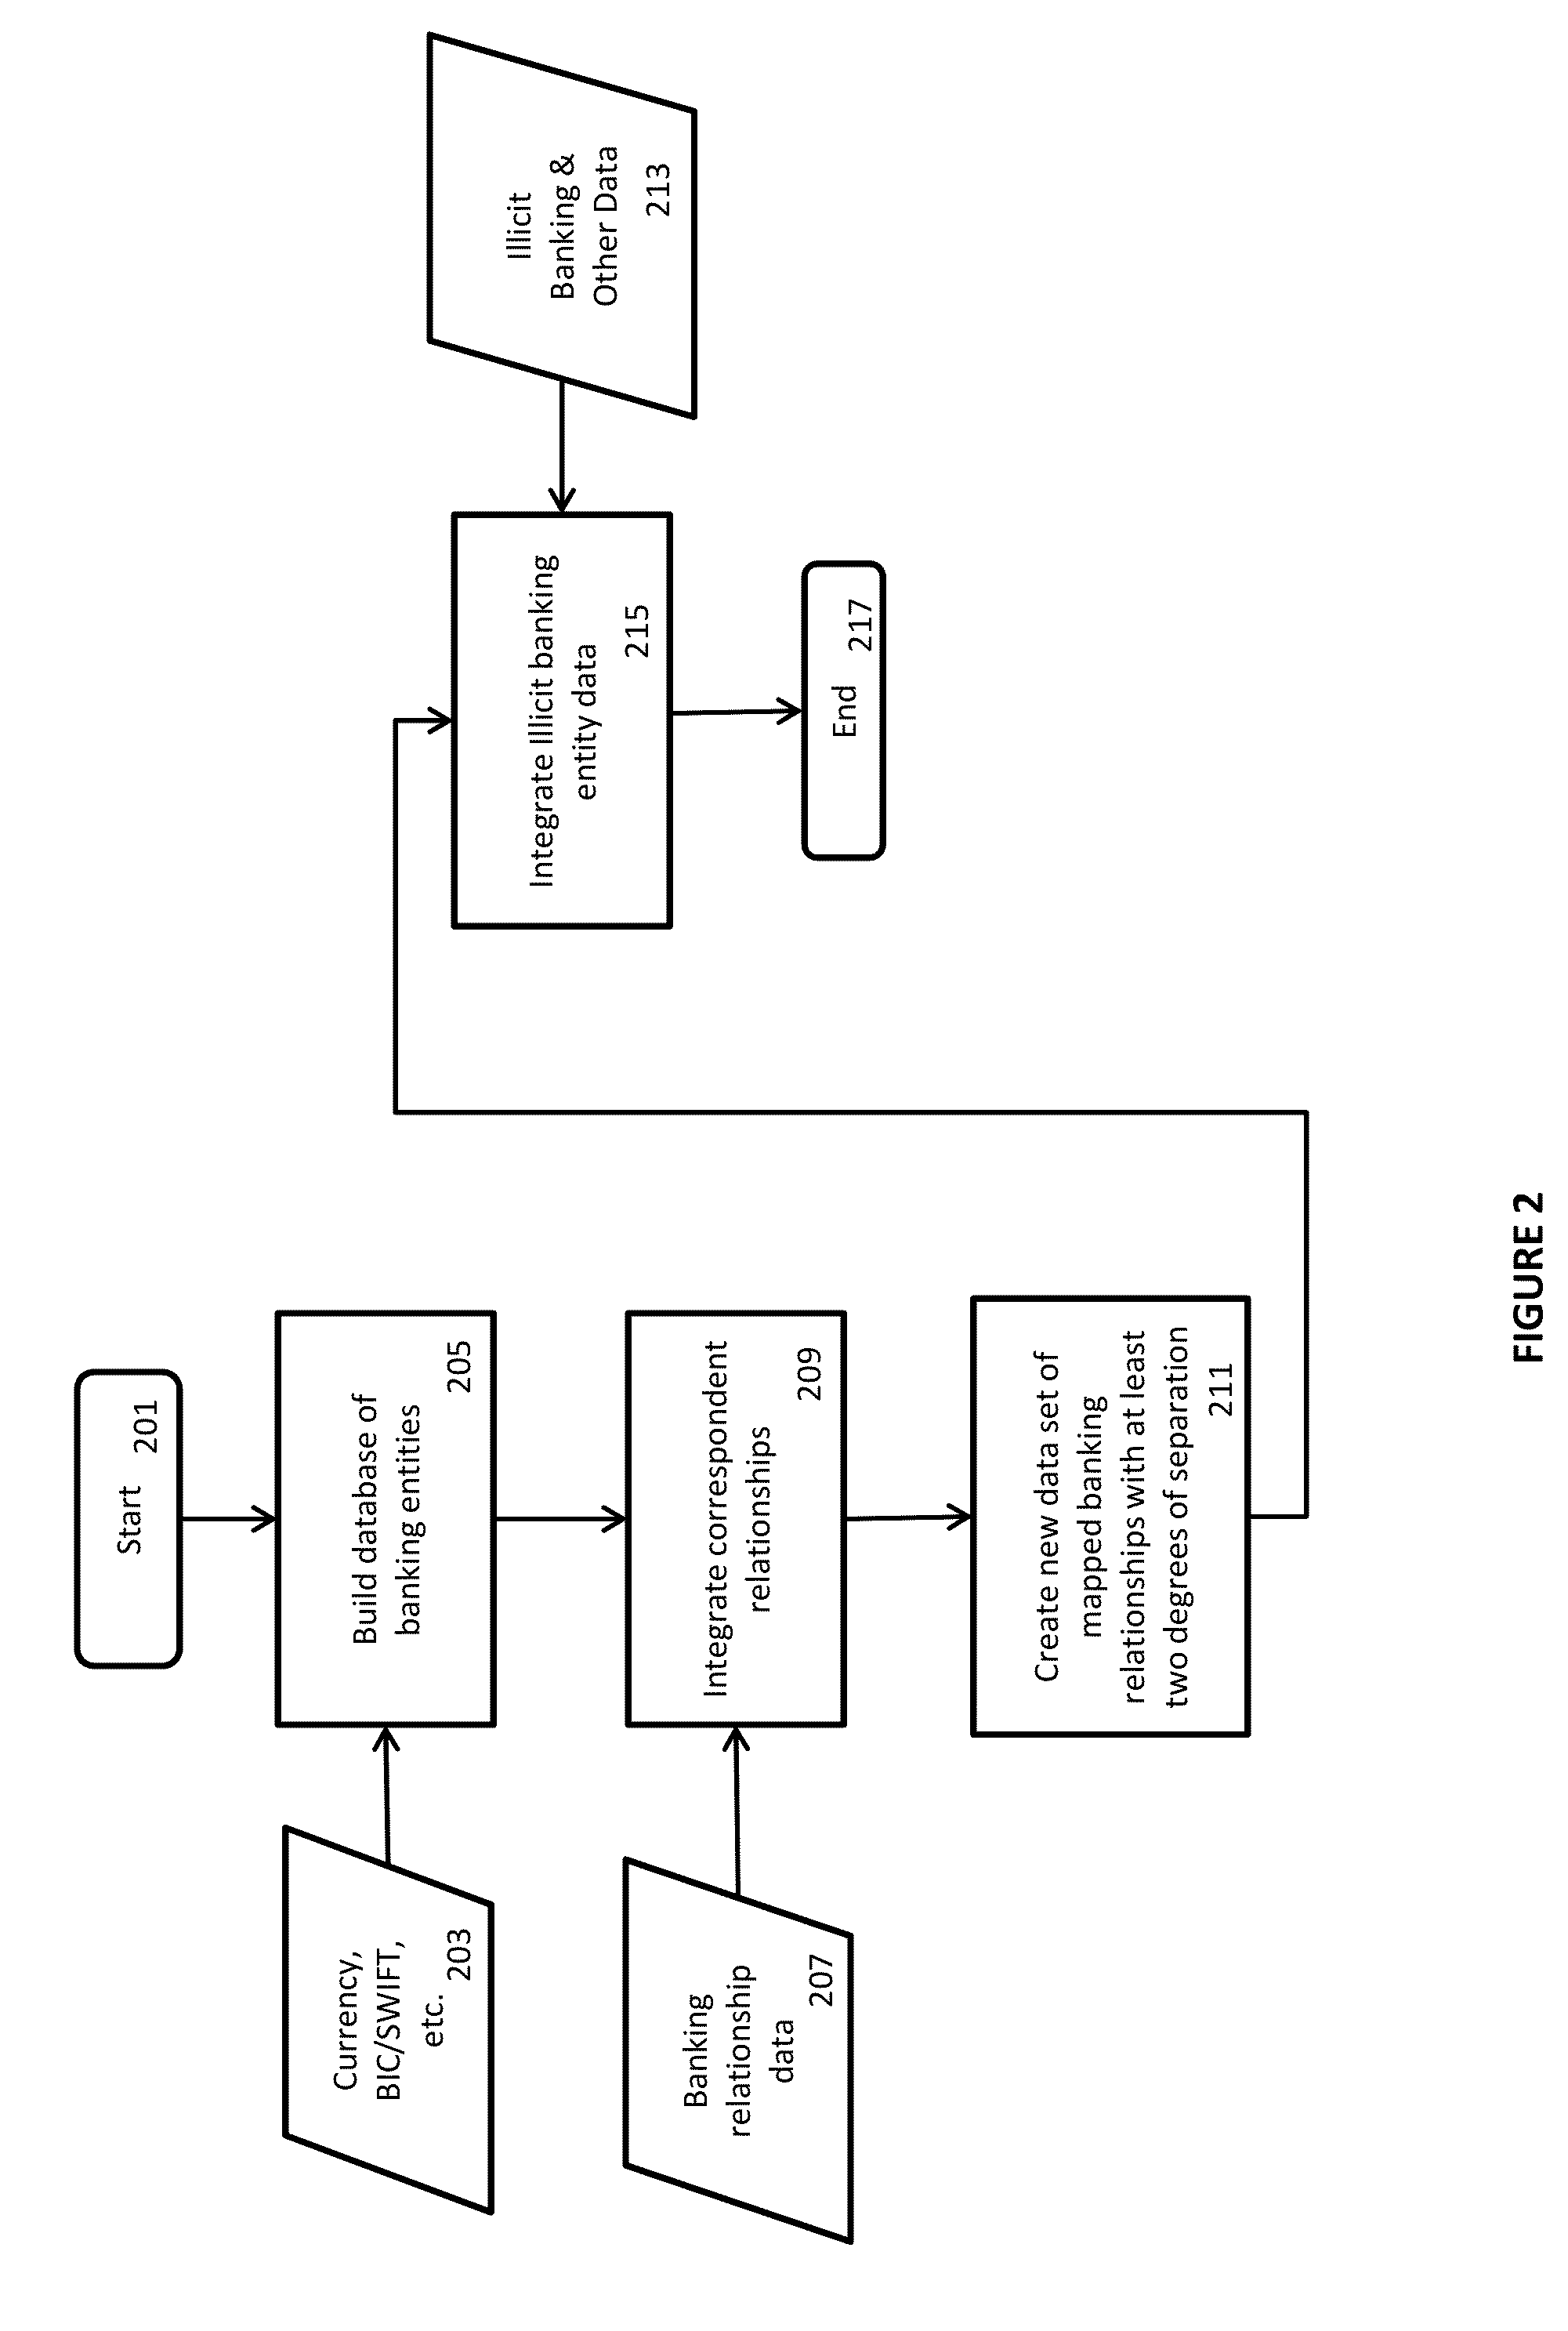 System for monitoring the compliance relationships of banking entities with validation, rerouting, and fee determination of financial transactions